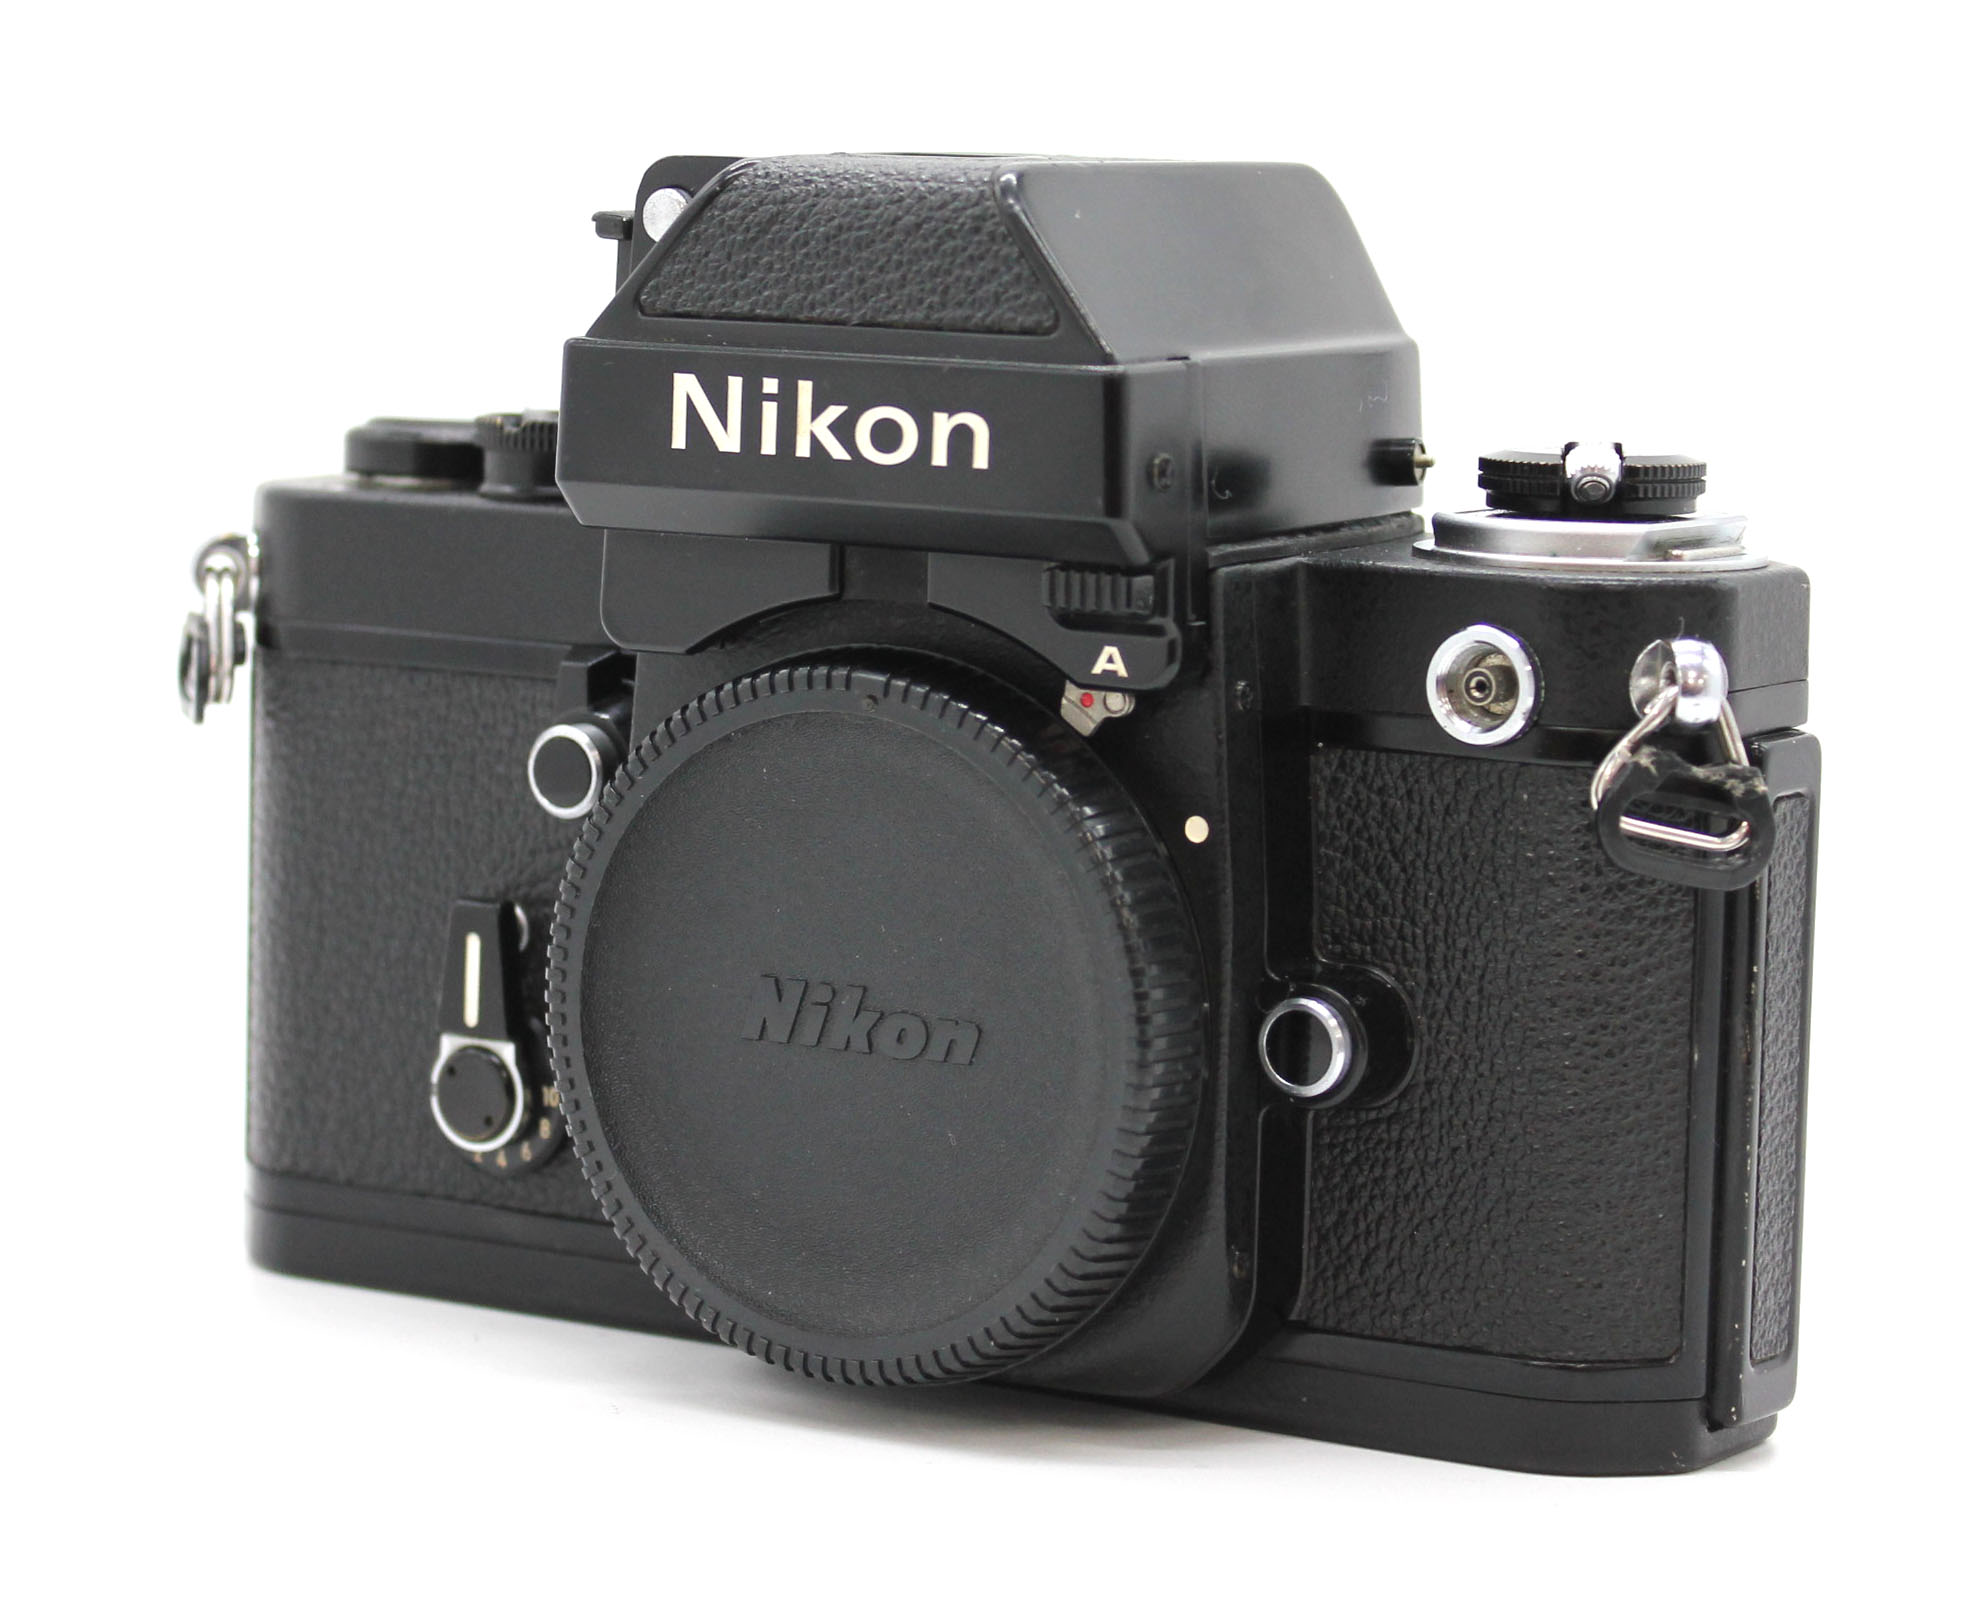 Nikon F2 Titan F2T No Name 35mm SLR Film Camera Body with Photomic A DP-11 Finder from Japan